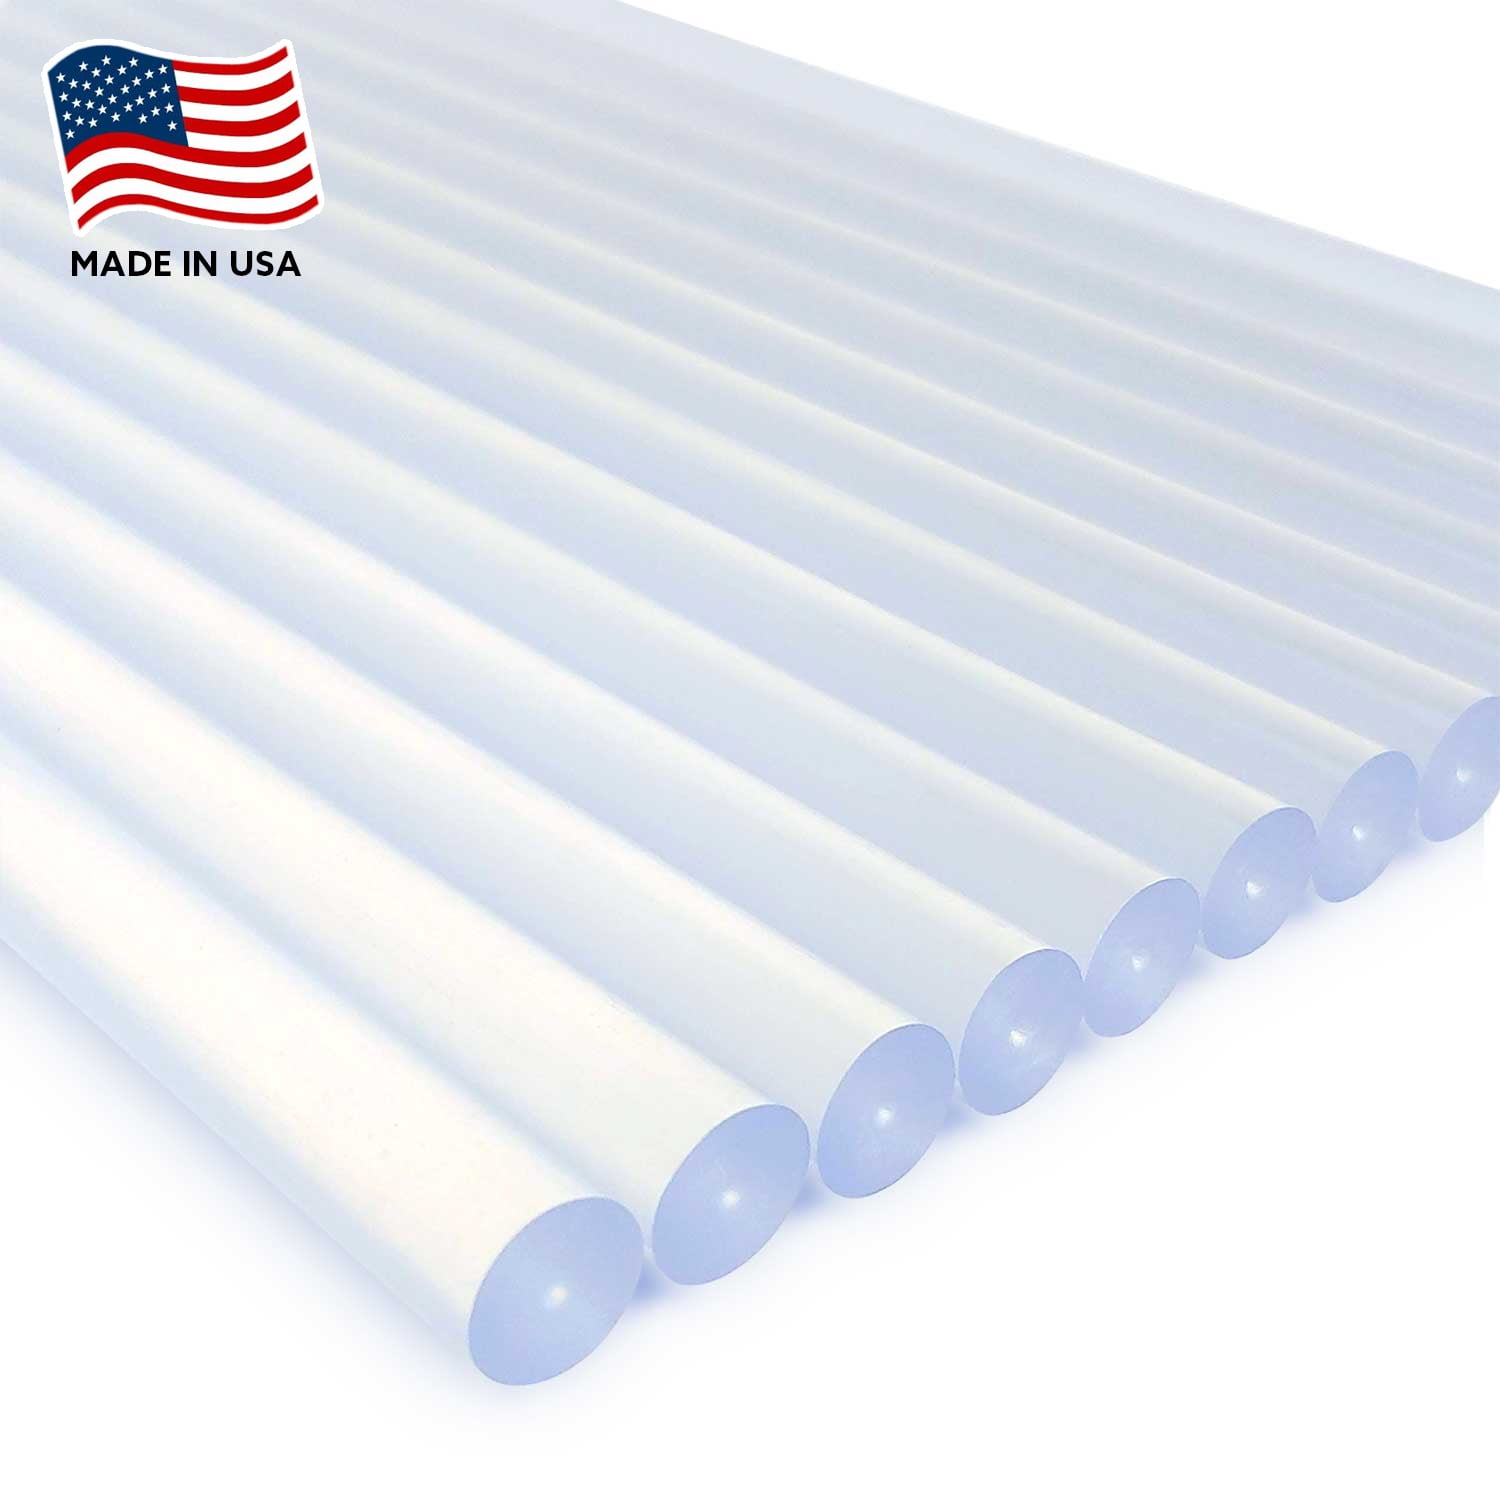 Wholesale 10 Pack High Viscosity Hot Melt Adhesive Sticks In For 10mm Glue  Sticks 7mm/11mm*300mm From Symeng, $7.54